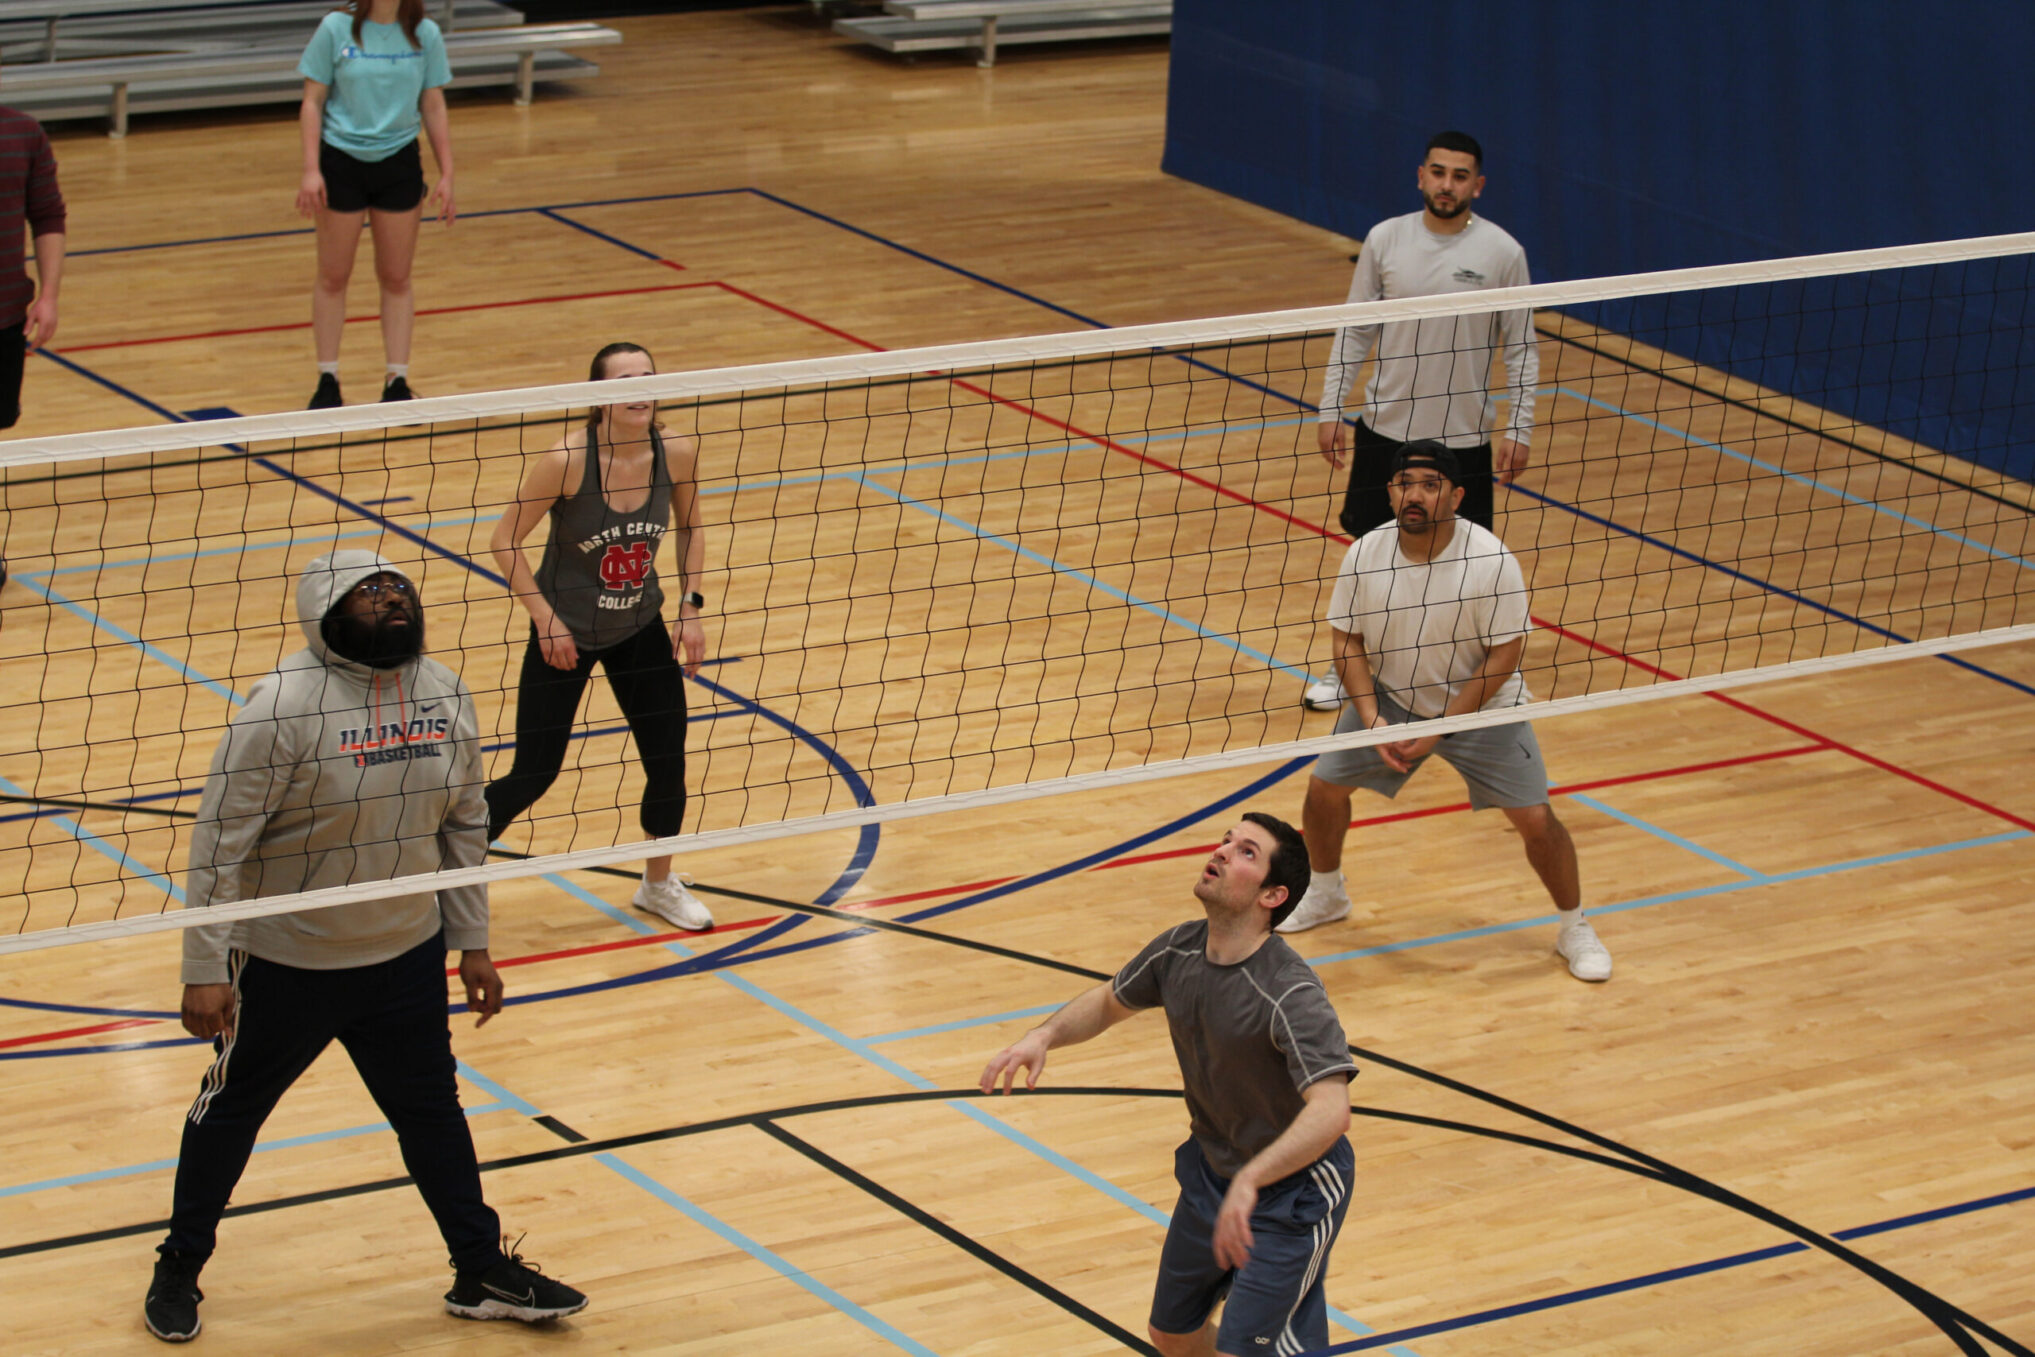 Adults playing volleyball in a gym volleyball court